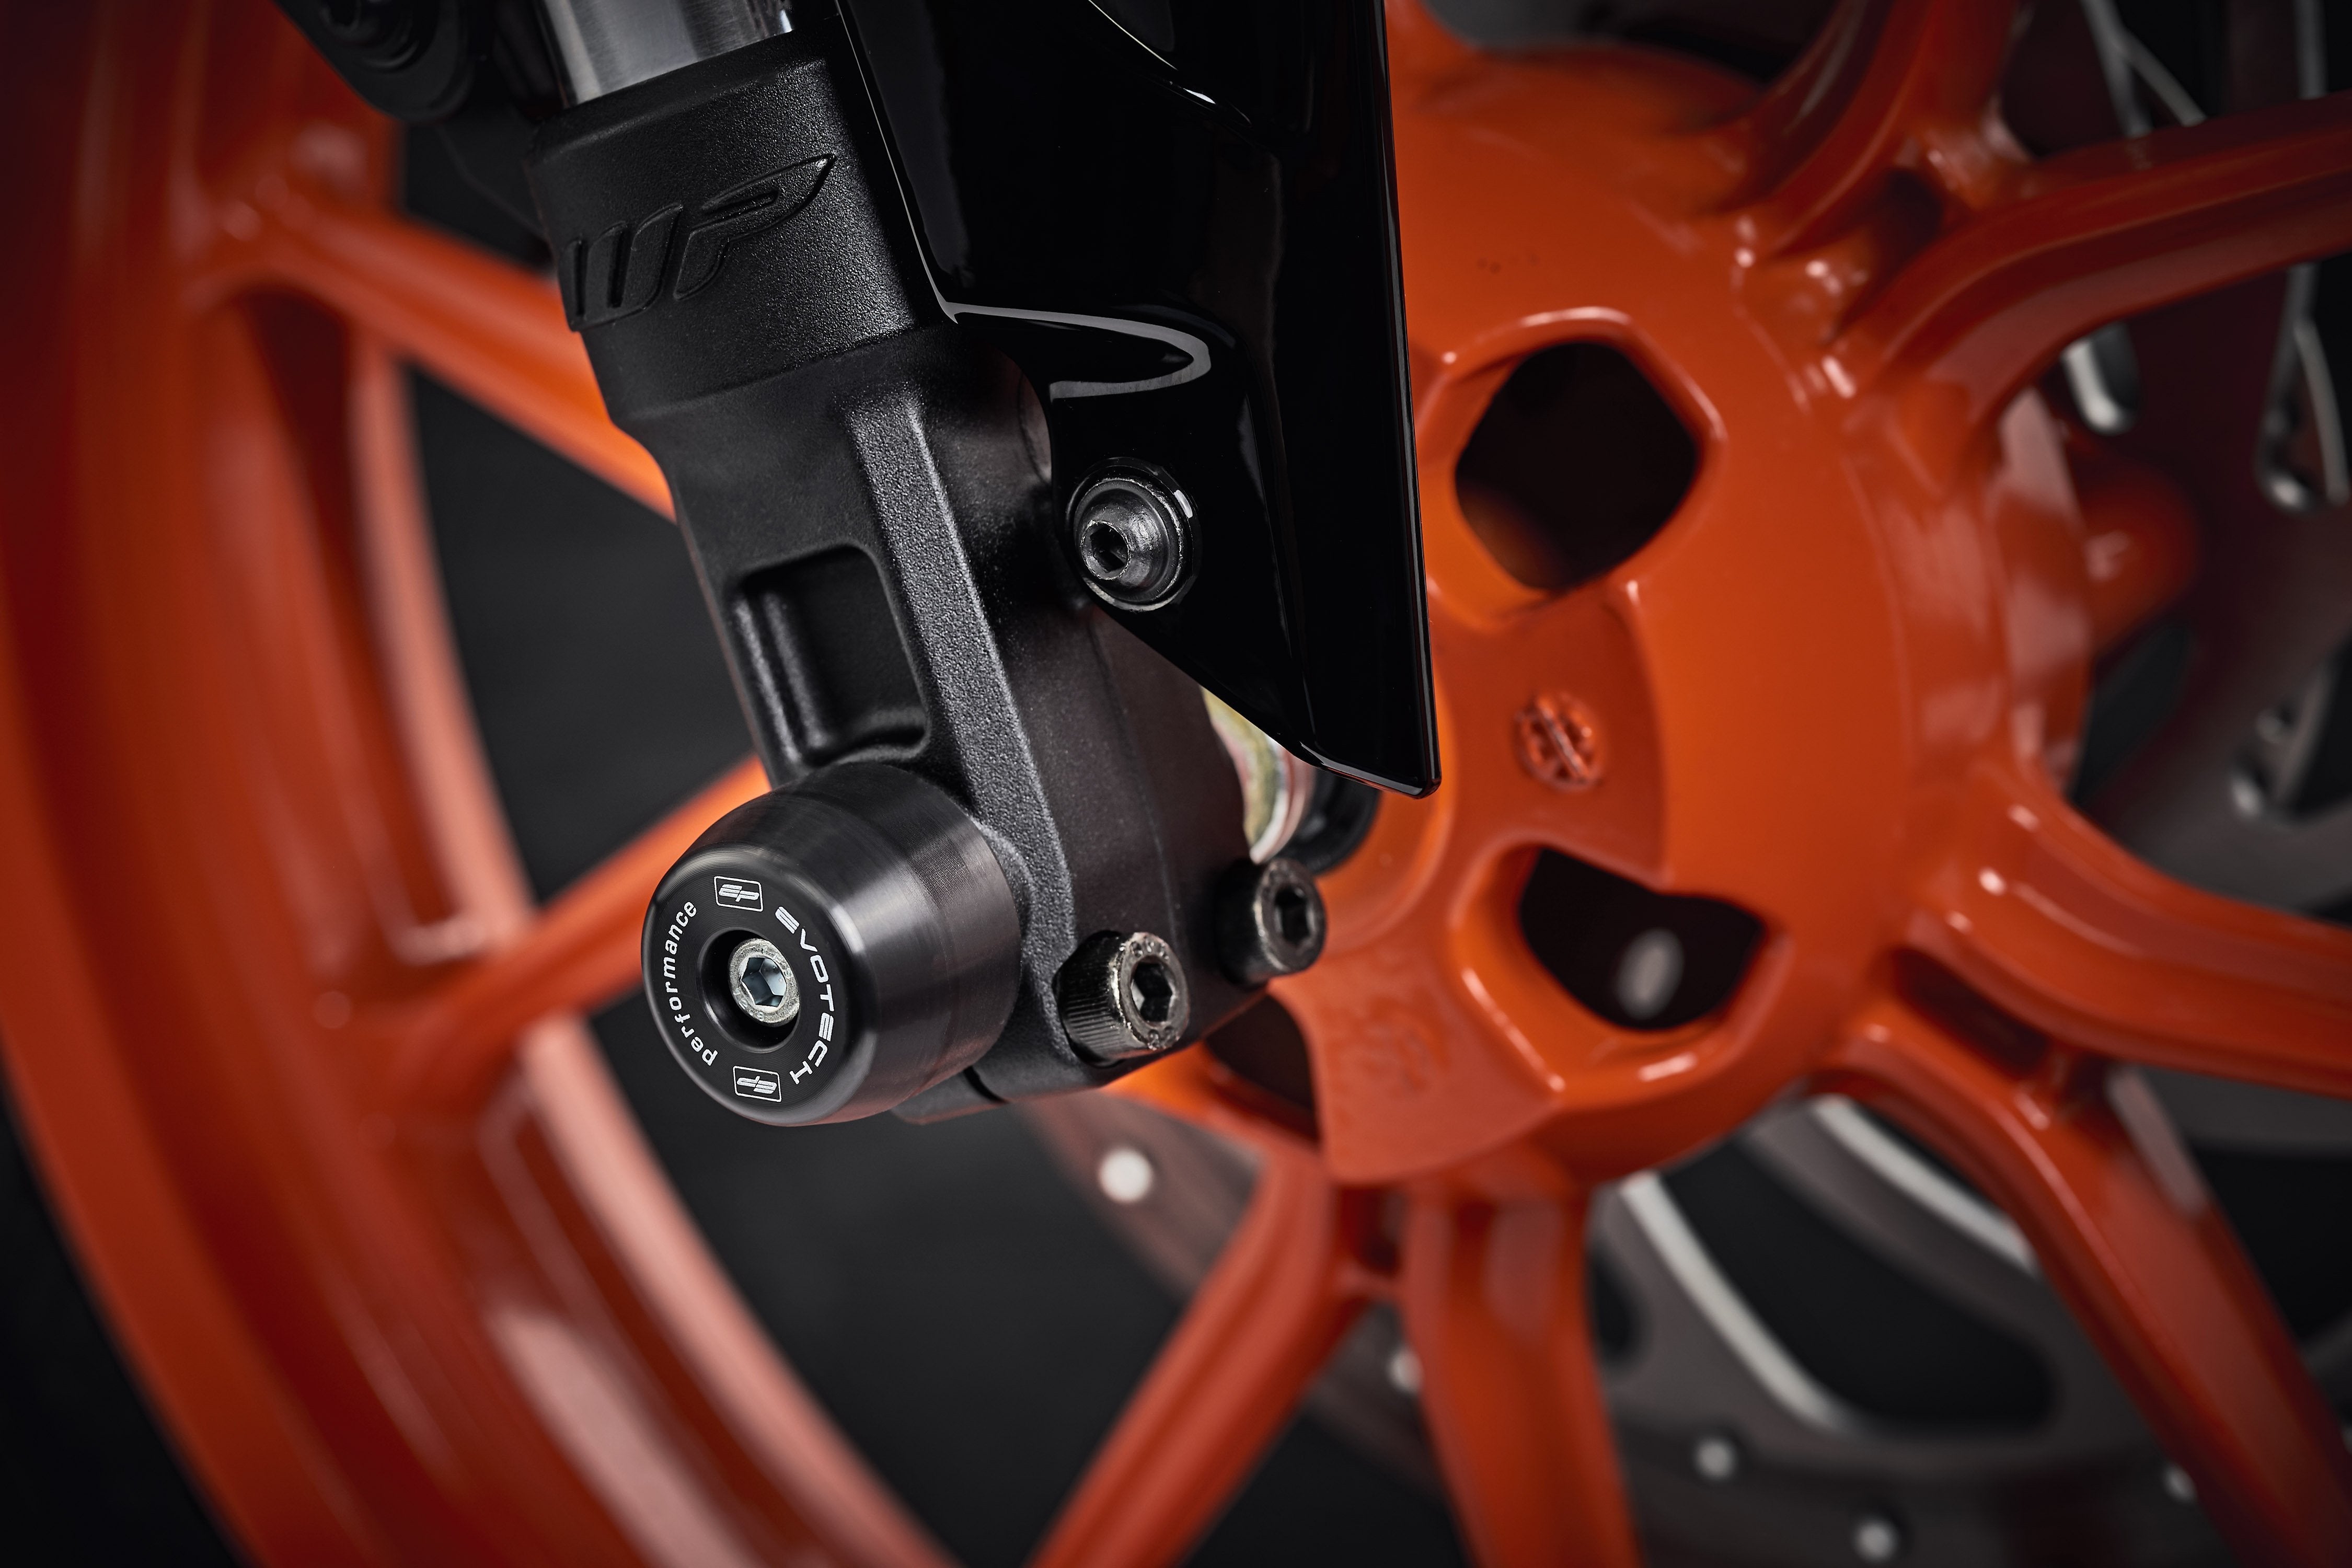 The lower front fork of the KTM RC 390 with EP Front Spindle Bobbins securely attached, offering crash protection to the motorcycleâs front wheel.